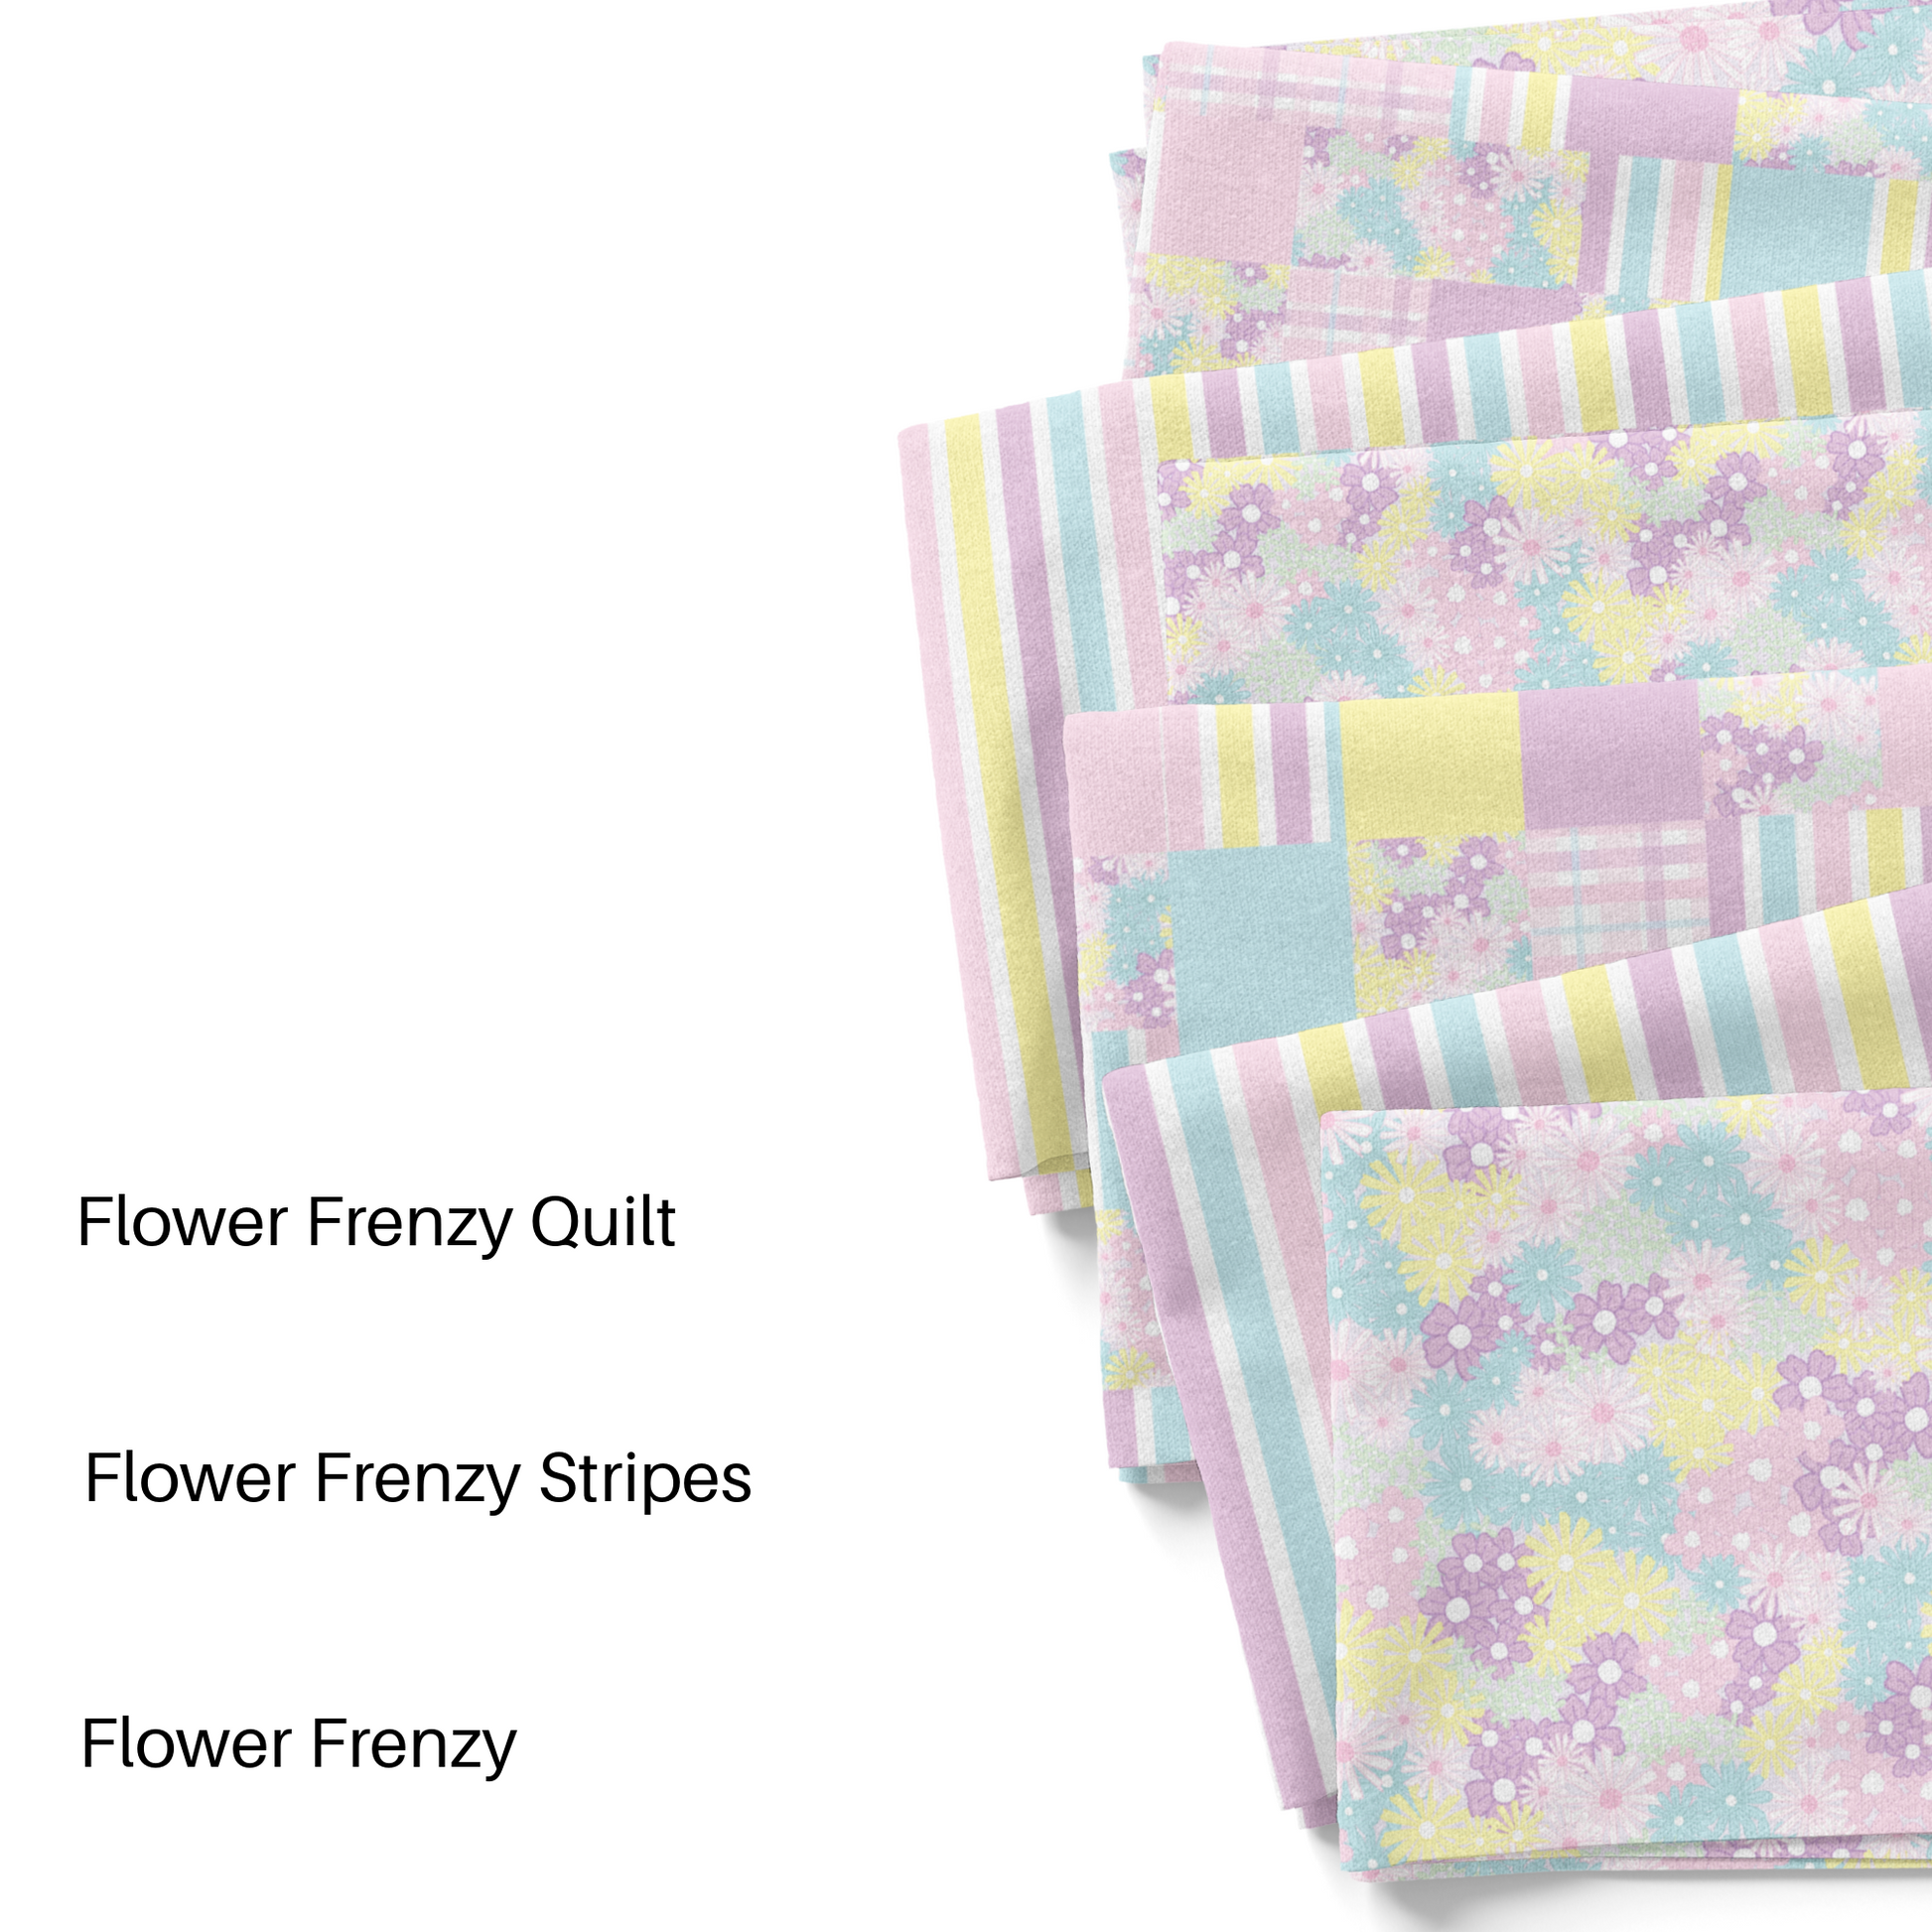 Wallflower Graphics "Flower Frenzy" Spring Fabric by the yard swatches.